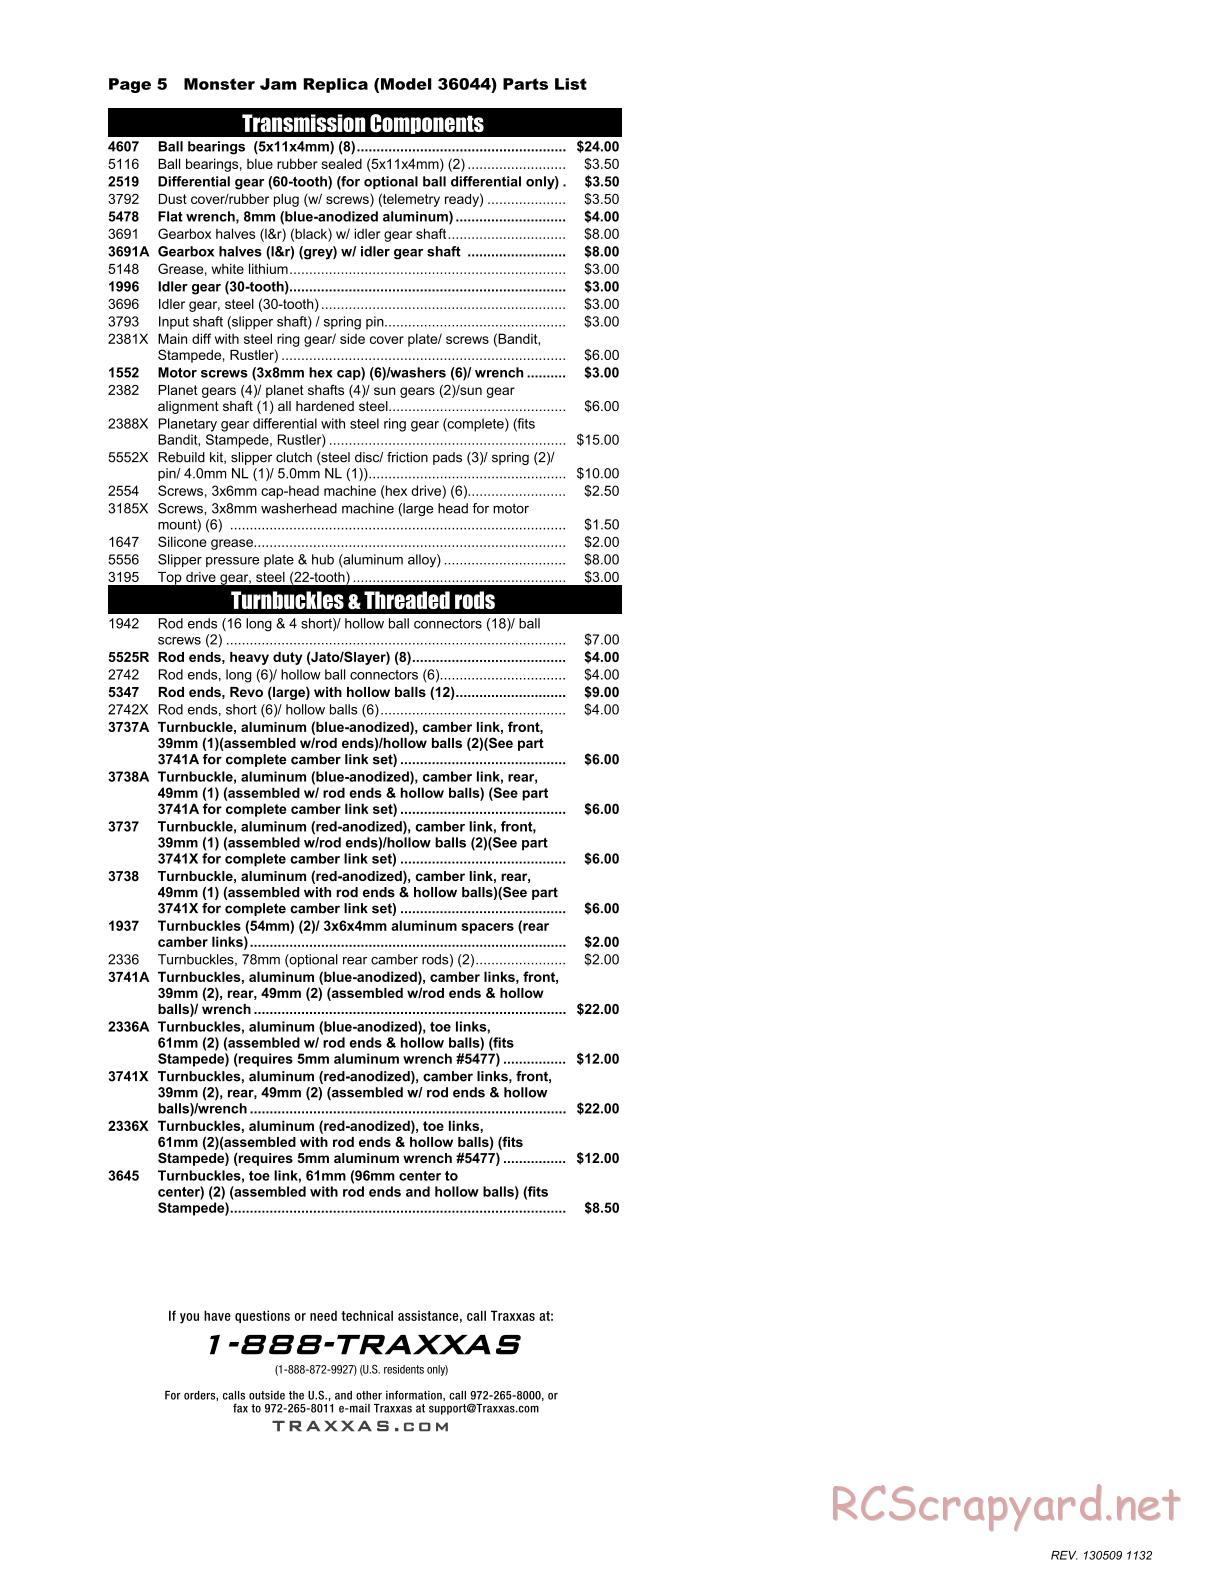 Traxxas - Monster Jam - Son-Uva Digger - Parts List - Page 5